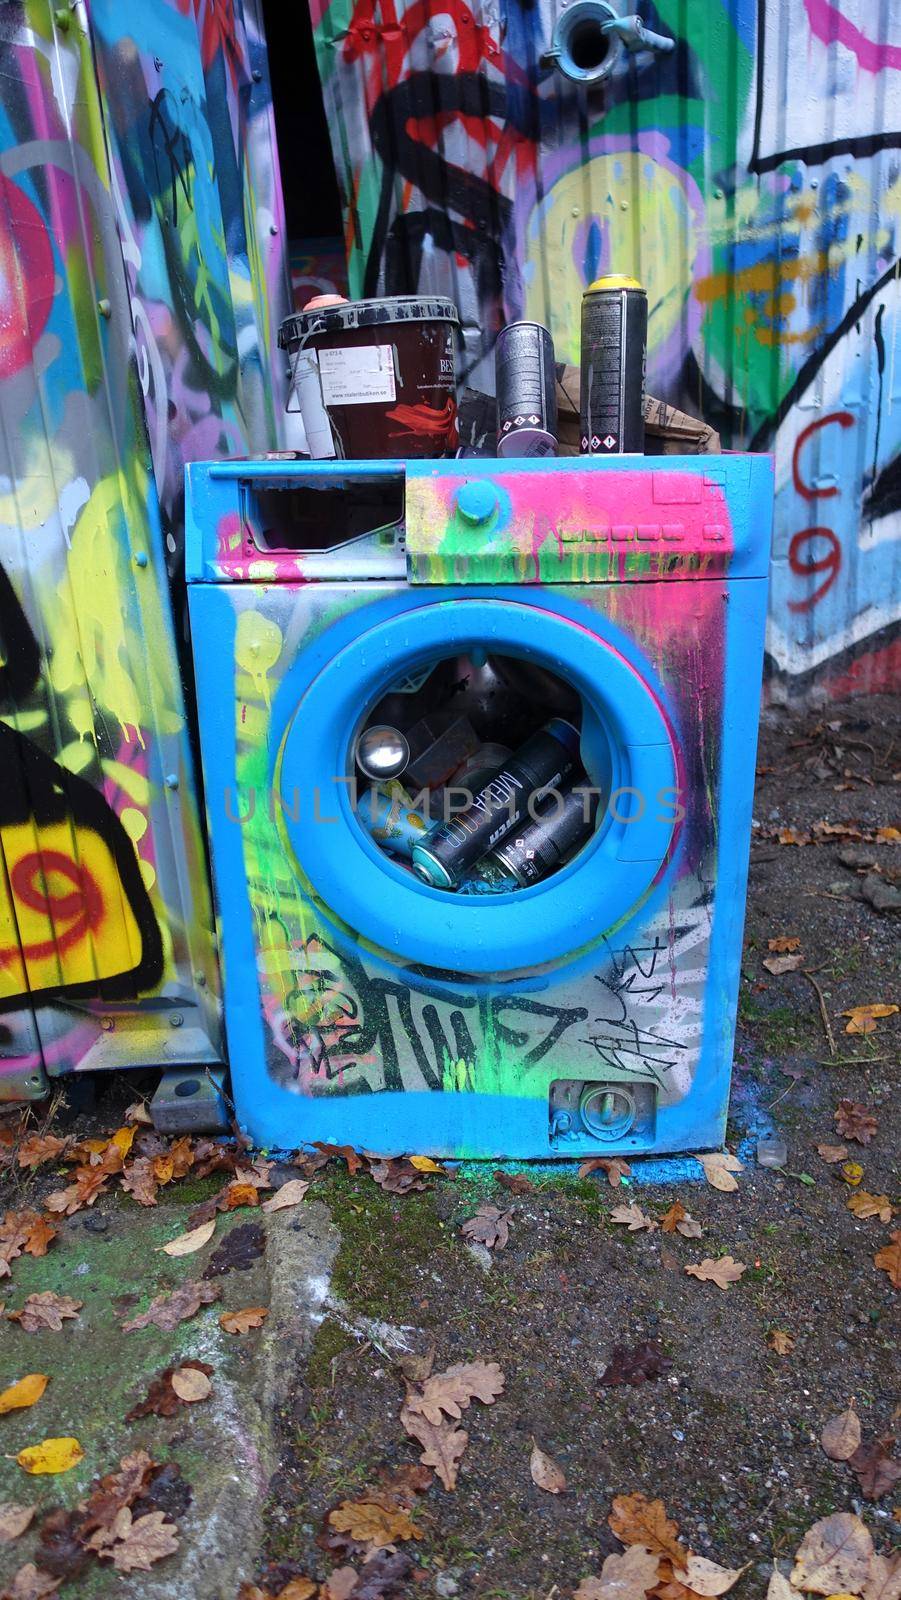 Stockholm, Snosatra, October 28, 2020. A colored washing machine used as a basket to throw away the coloring spray cans used during the day